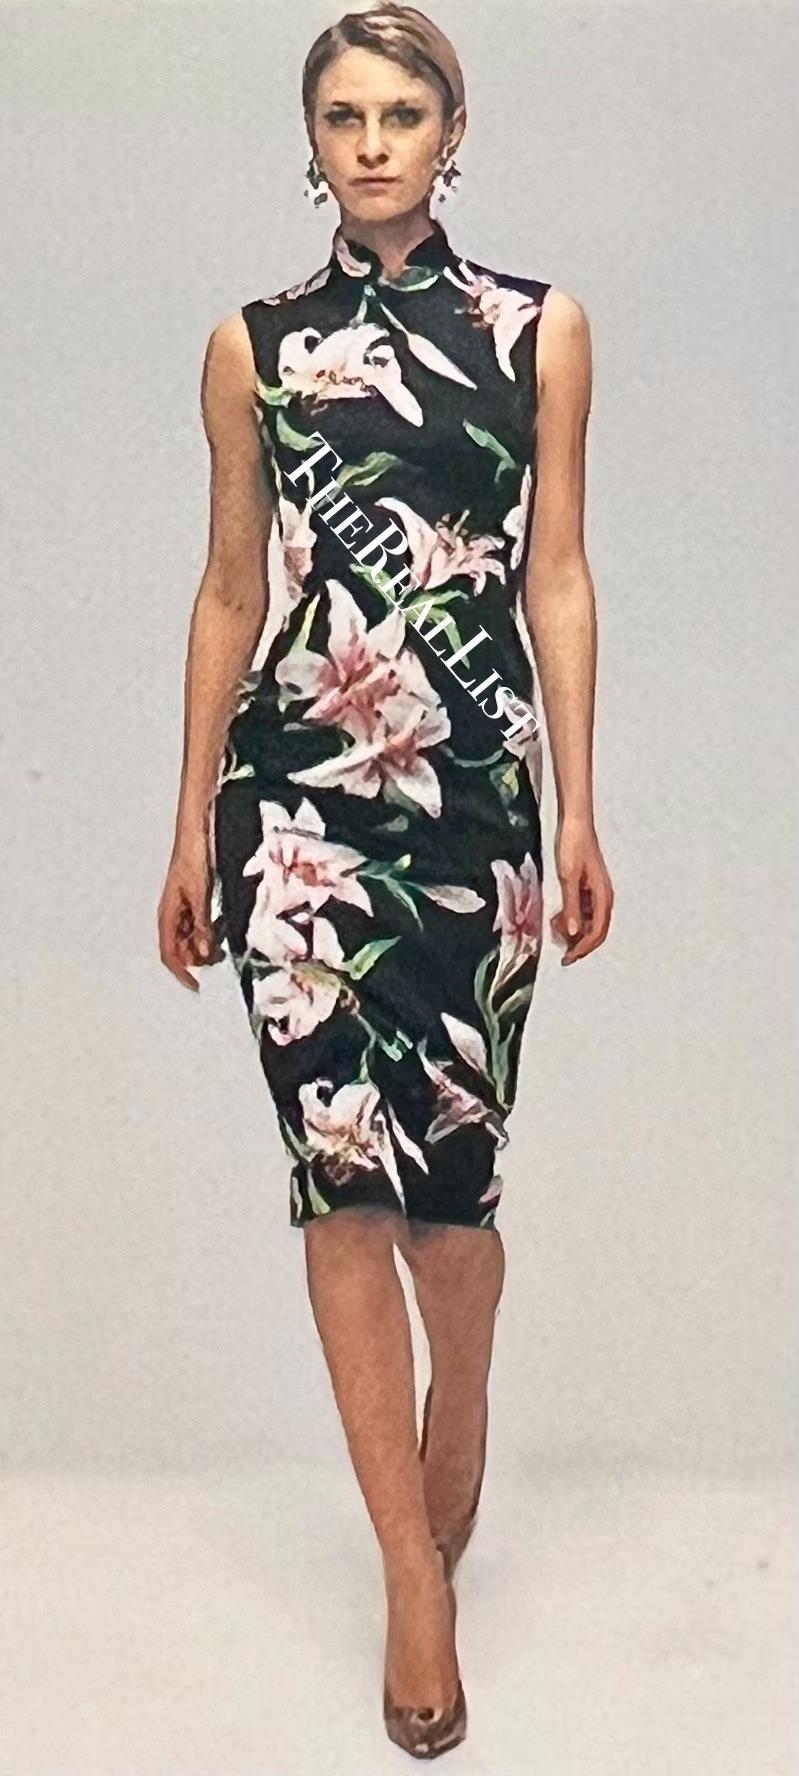 From the Spring/Summer 2001 collection, this lily print Dolce & Gabbana dress debuted on the season's runway. This form-fitting black dress features a standing collar and knee-length hem.

Approximate measurements:
Size - 44IT
Bust: 33 - 42